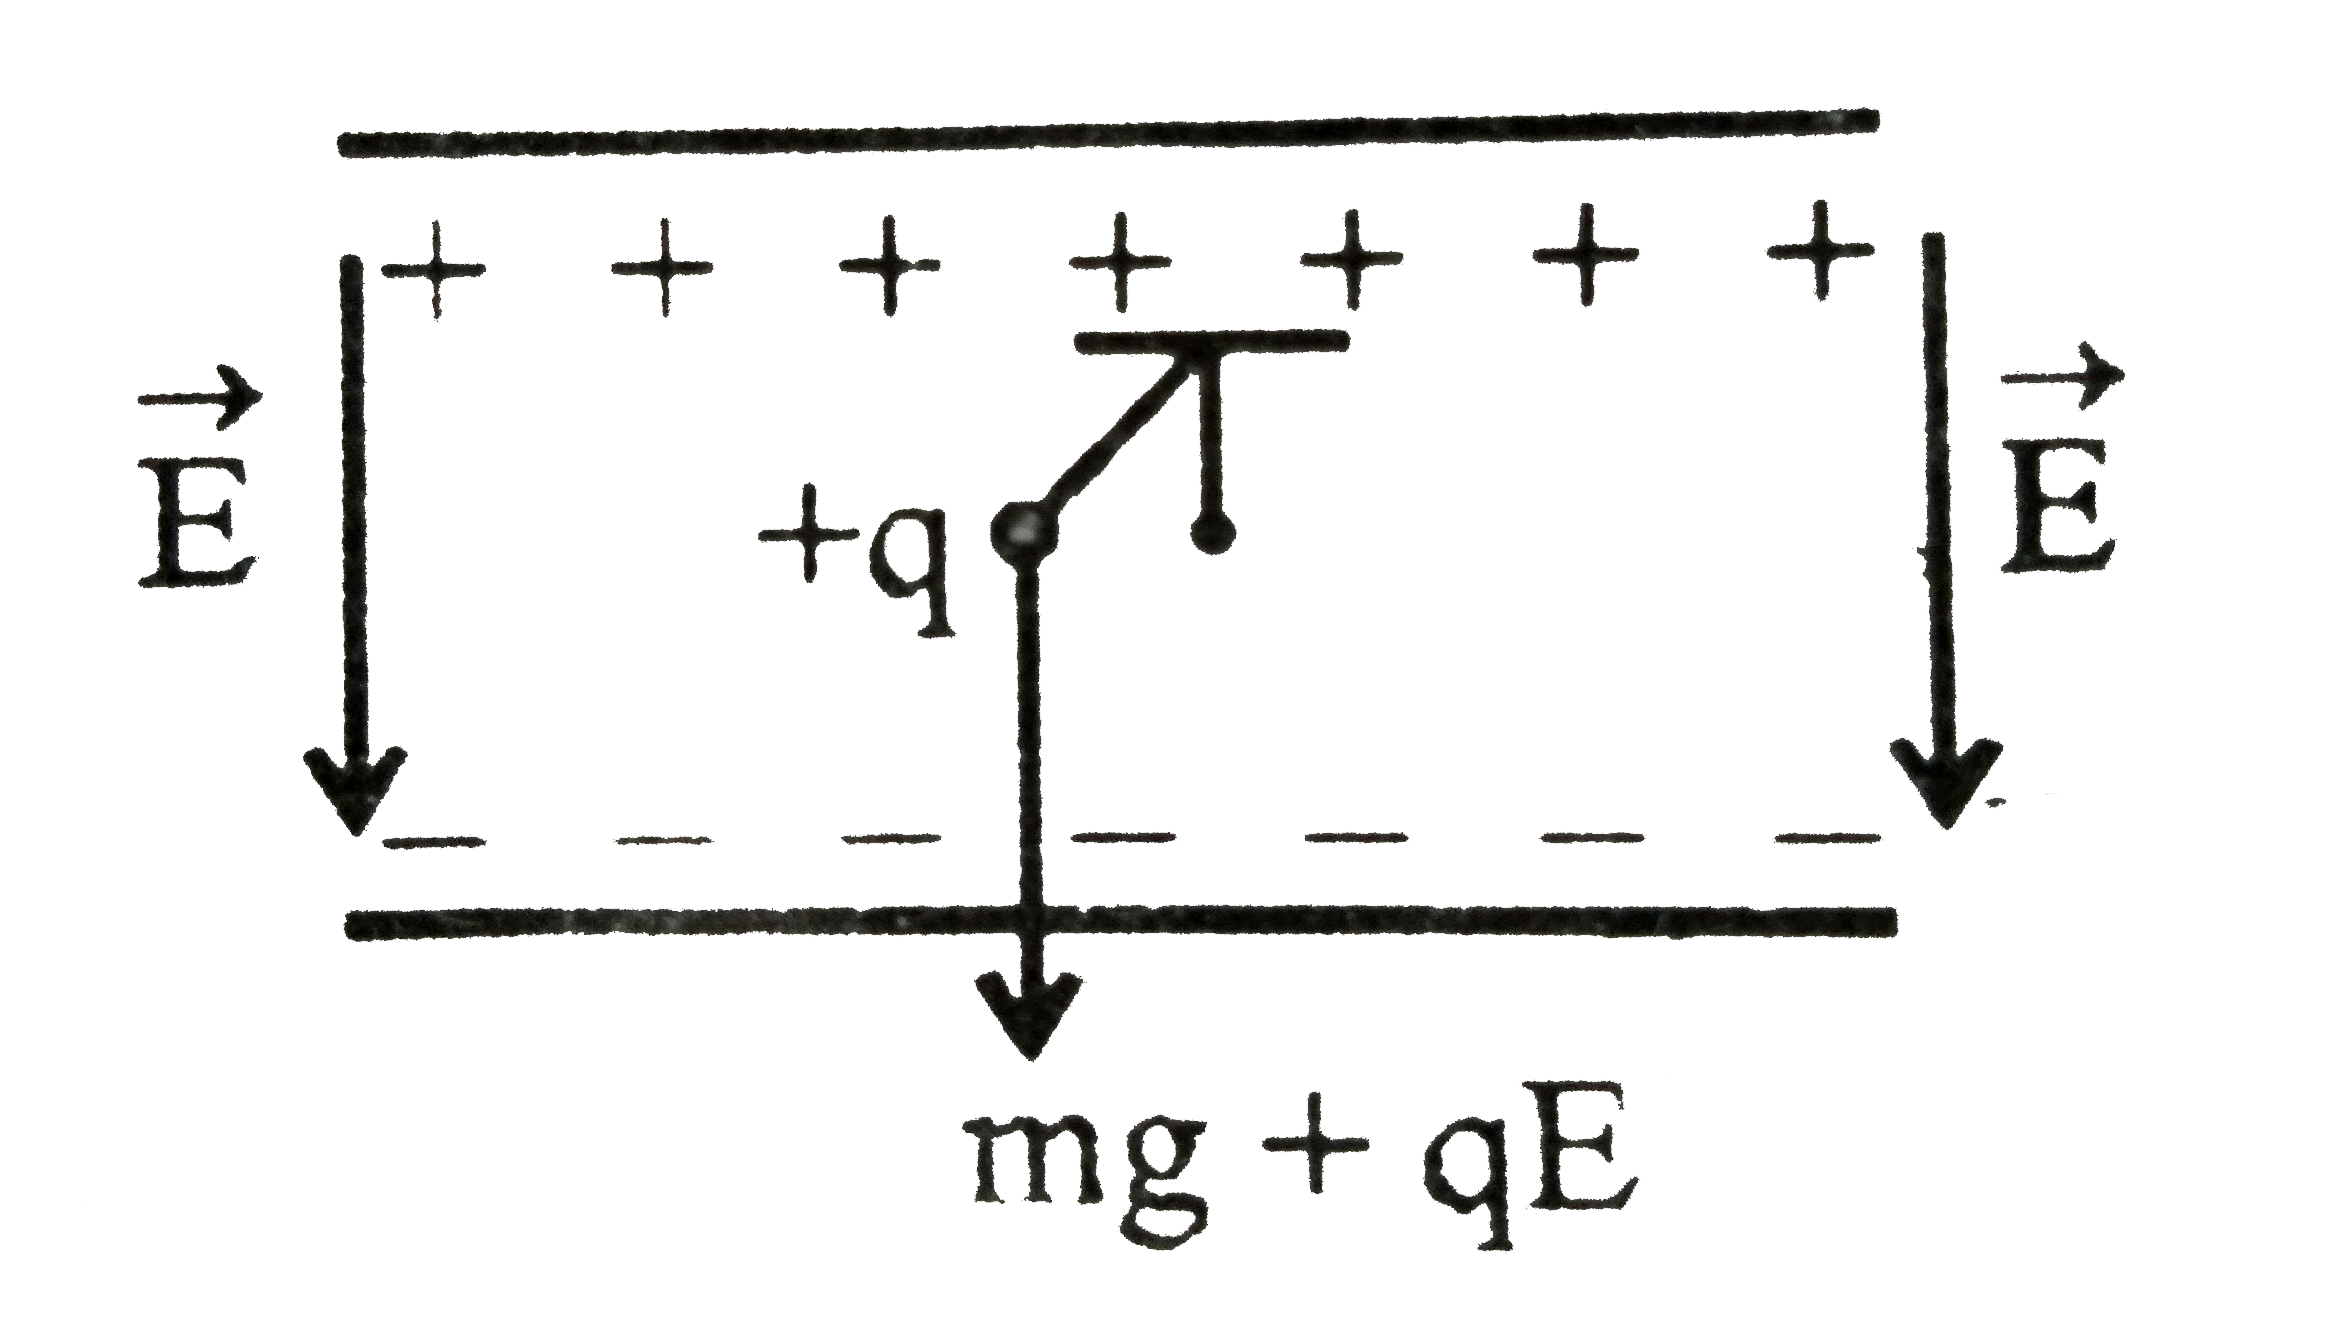 A simple pendulum having caharge  q1 mass ma and effective length 1, is suspended from a rigid support between the plates of charged horizontal capacitor. Electric field in the capacitor is perpendicular to the plates and directed vertically downwards .      The time period of socillattion of the pendulum is given by :